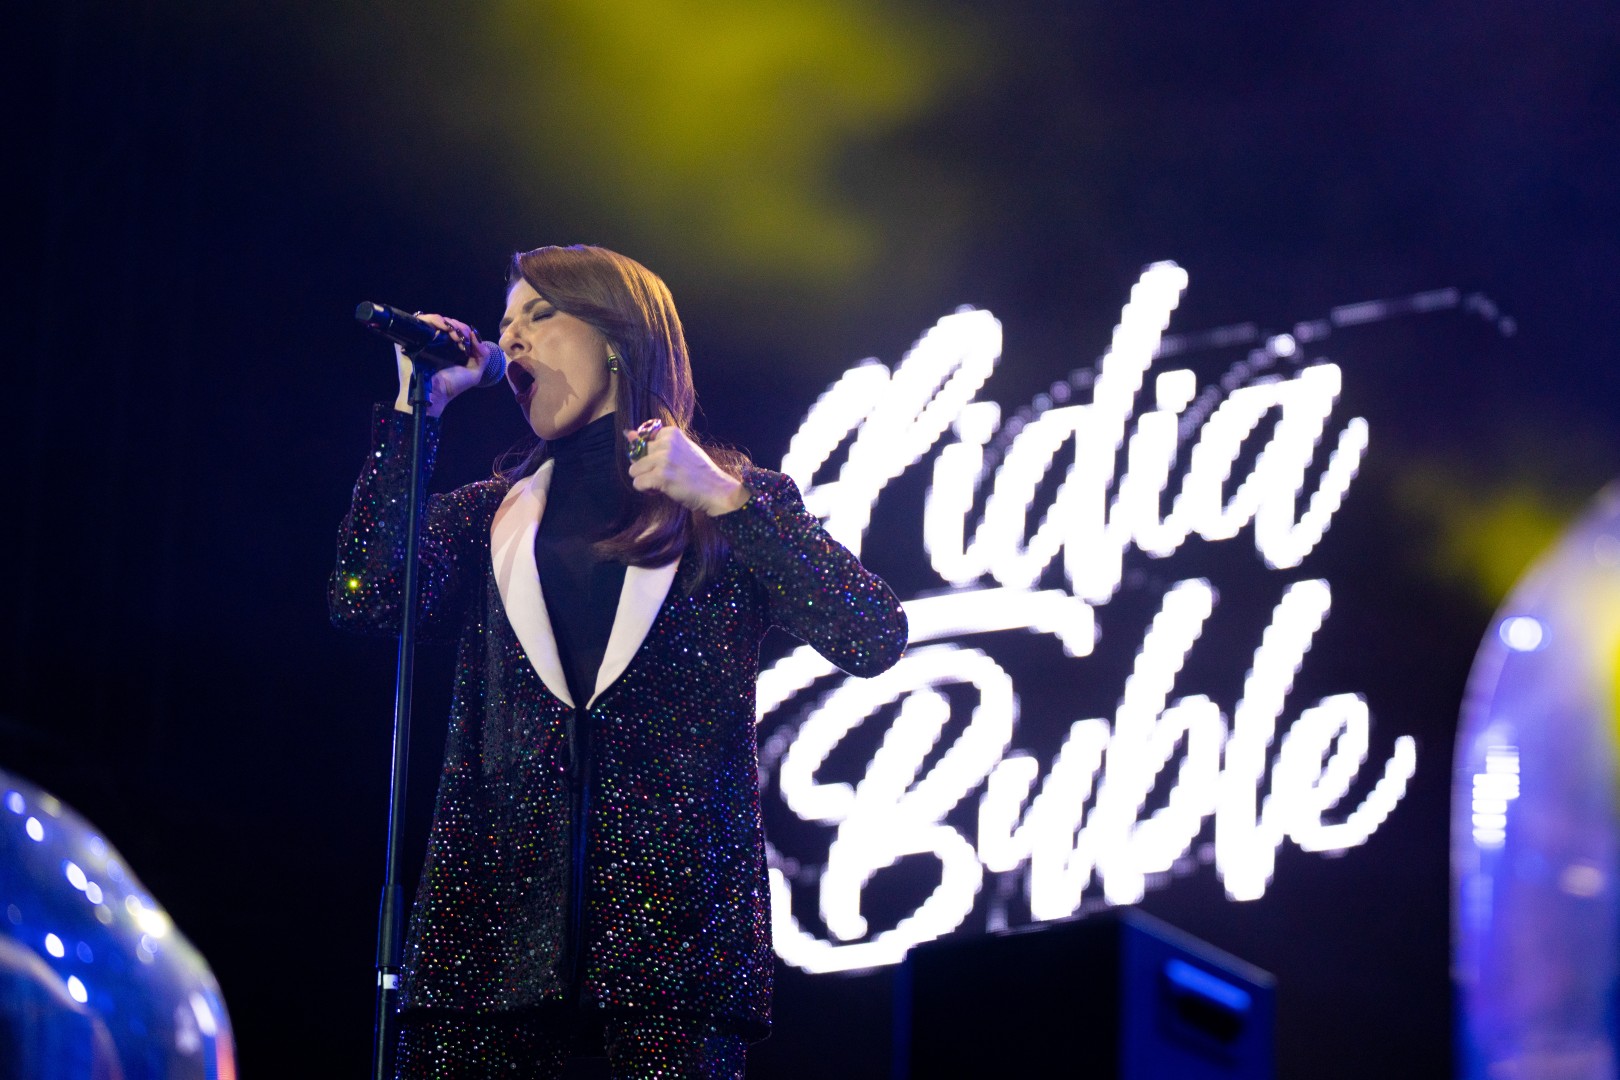 Lidia Buble at National Arena in Bucharest on March 12, 2022 (40eb4f1521)